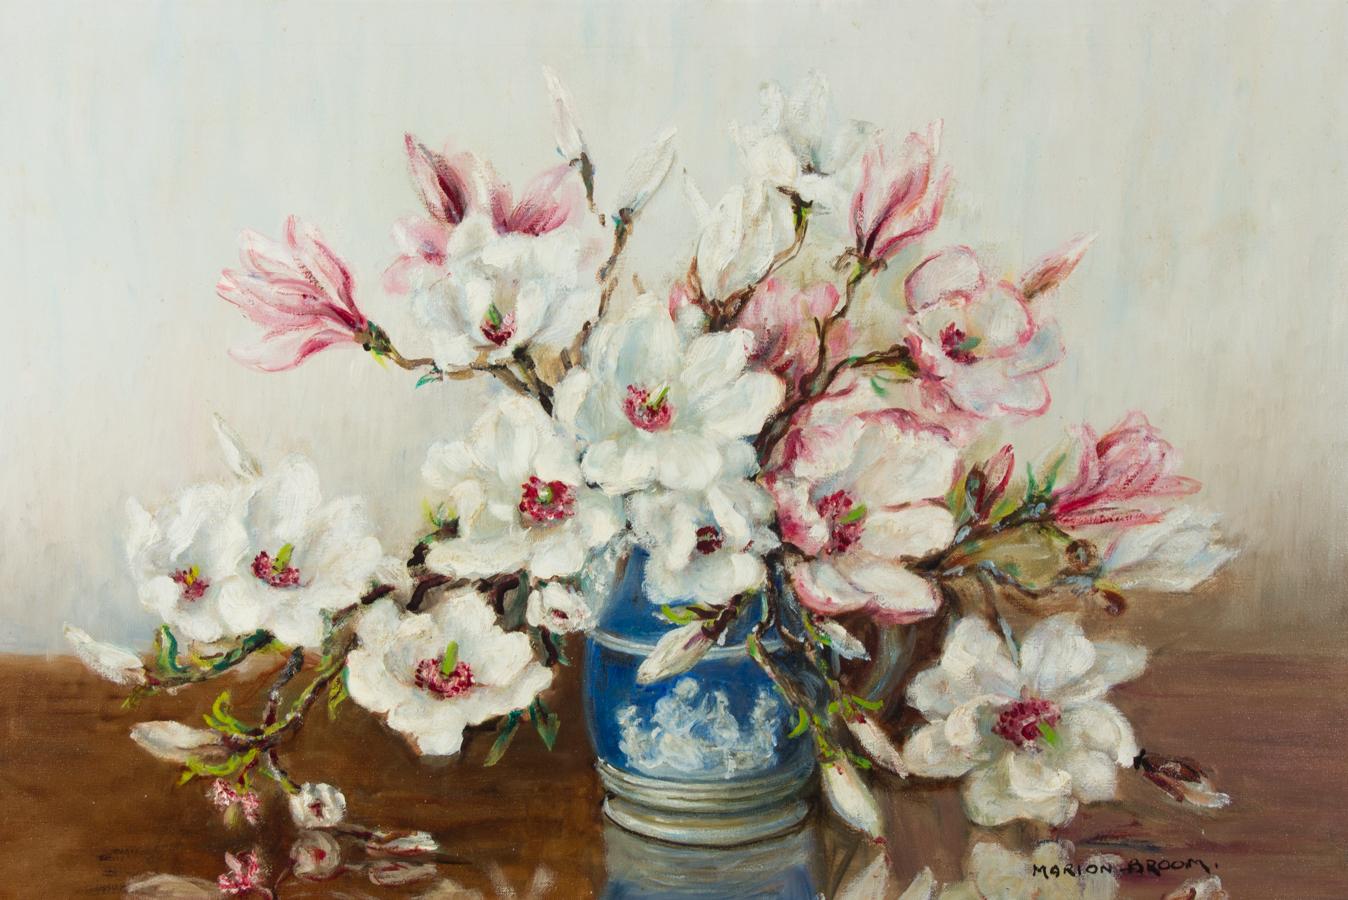 A stunning still life from well listed artist Marion Broom (1878-1962), depicting flowering magnolia branches in a fine blue vase. Broom has used expressive brush marks and areas of impasto to create a depth to her composition. The pastel shades are